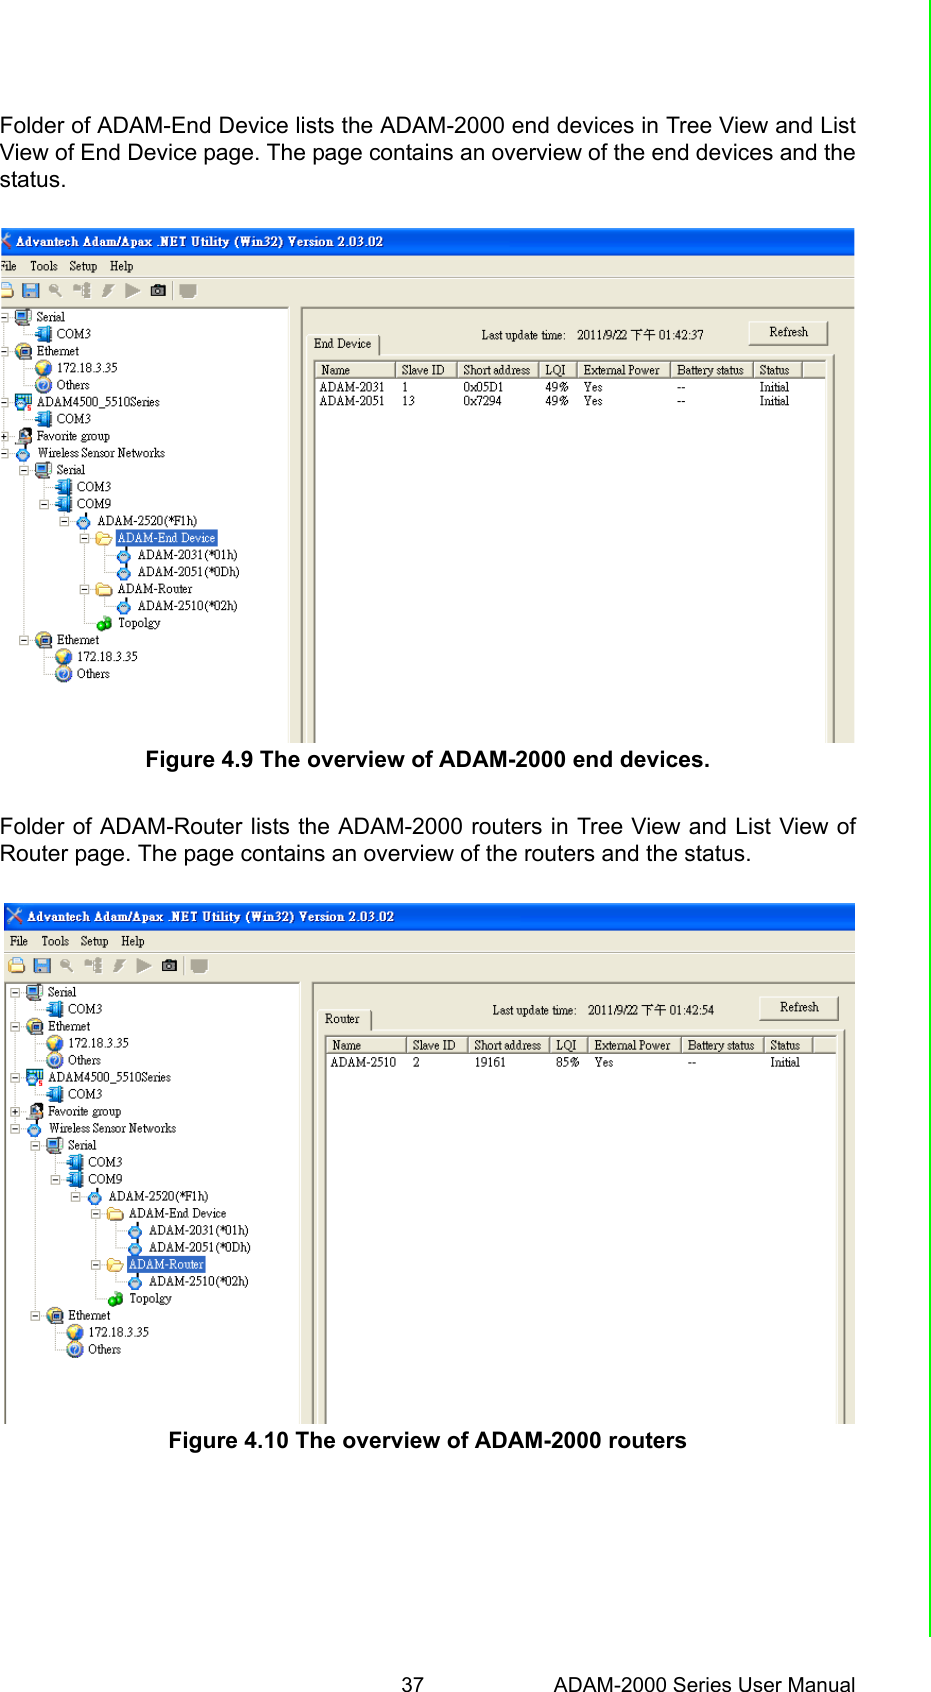 37 ADAM-2000 Series User ManualChapter 4 Software Configuration GuideFolder of ADAM-End Device lists the ADAM-2000 end devices in Tree View and ListView of End Device page. The page contains an overview of the end devices and thestatus.Figure 4.9 The overview of ADAM-2000 end devices.Folder of ADAM-Router lists the ADAM-2000 routers in Tree View and List View ofRouter page. The page contains an overview of the routers and the status.Figure 4.10 The overview of ADAM-2000 routers